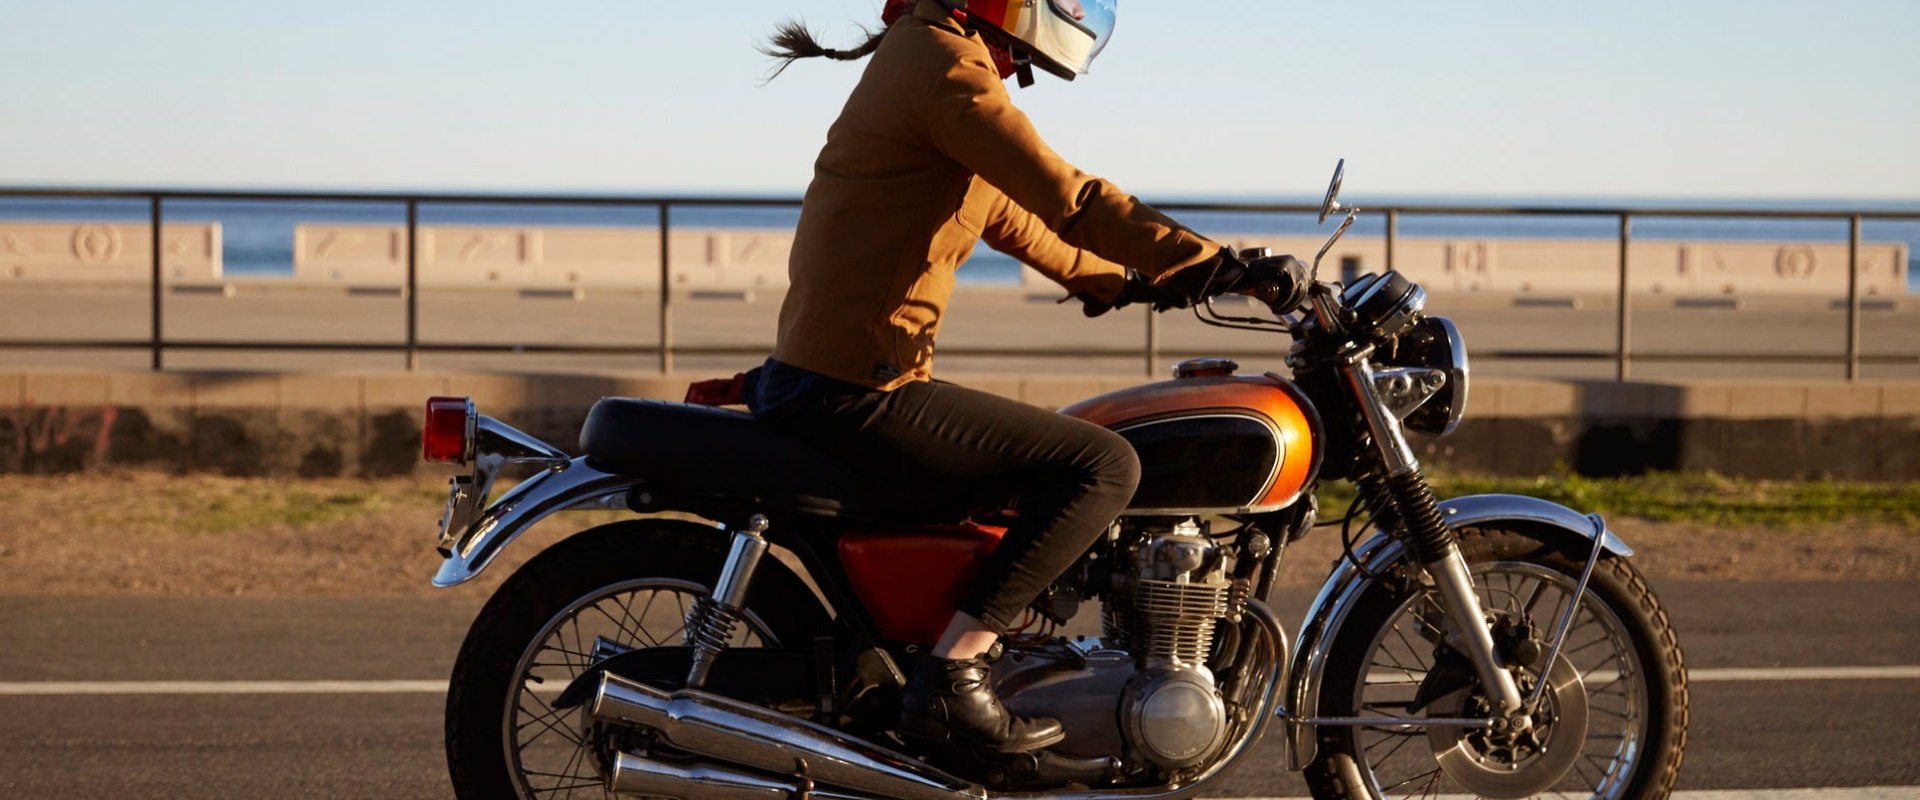 Tips for Finding Affordable Motorcycle Insurance for College Students